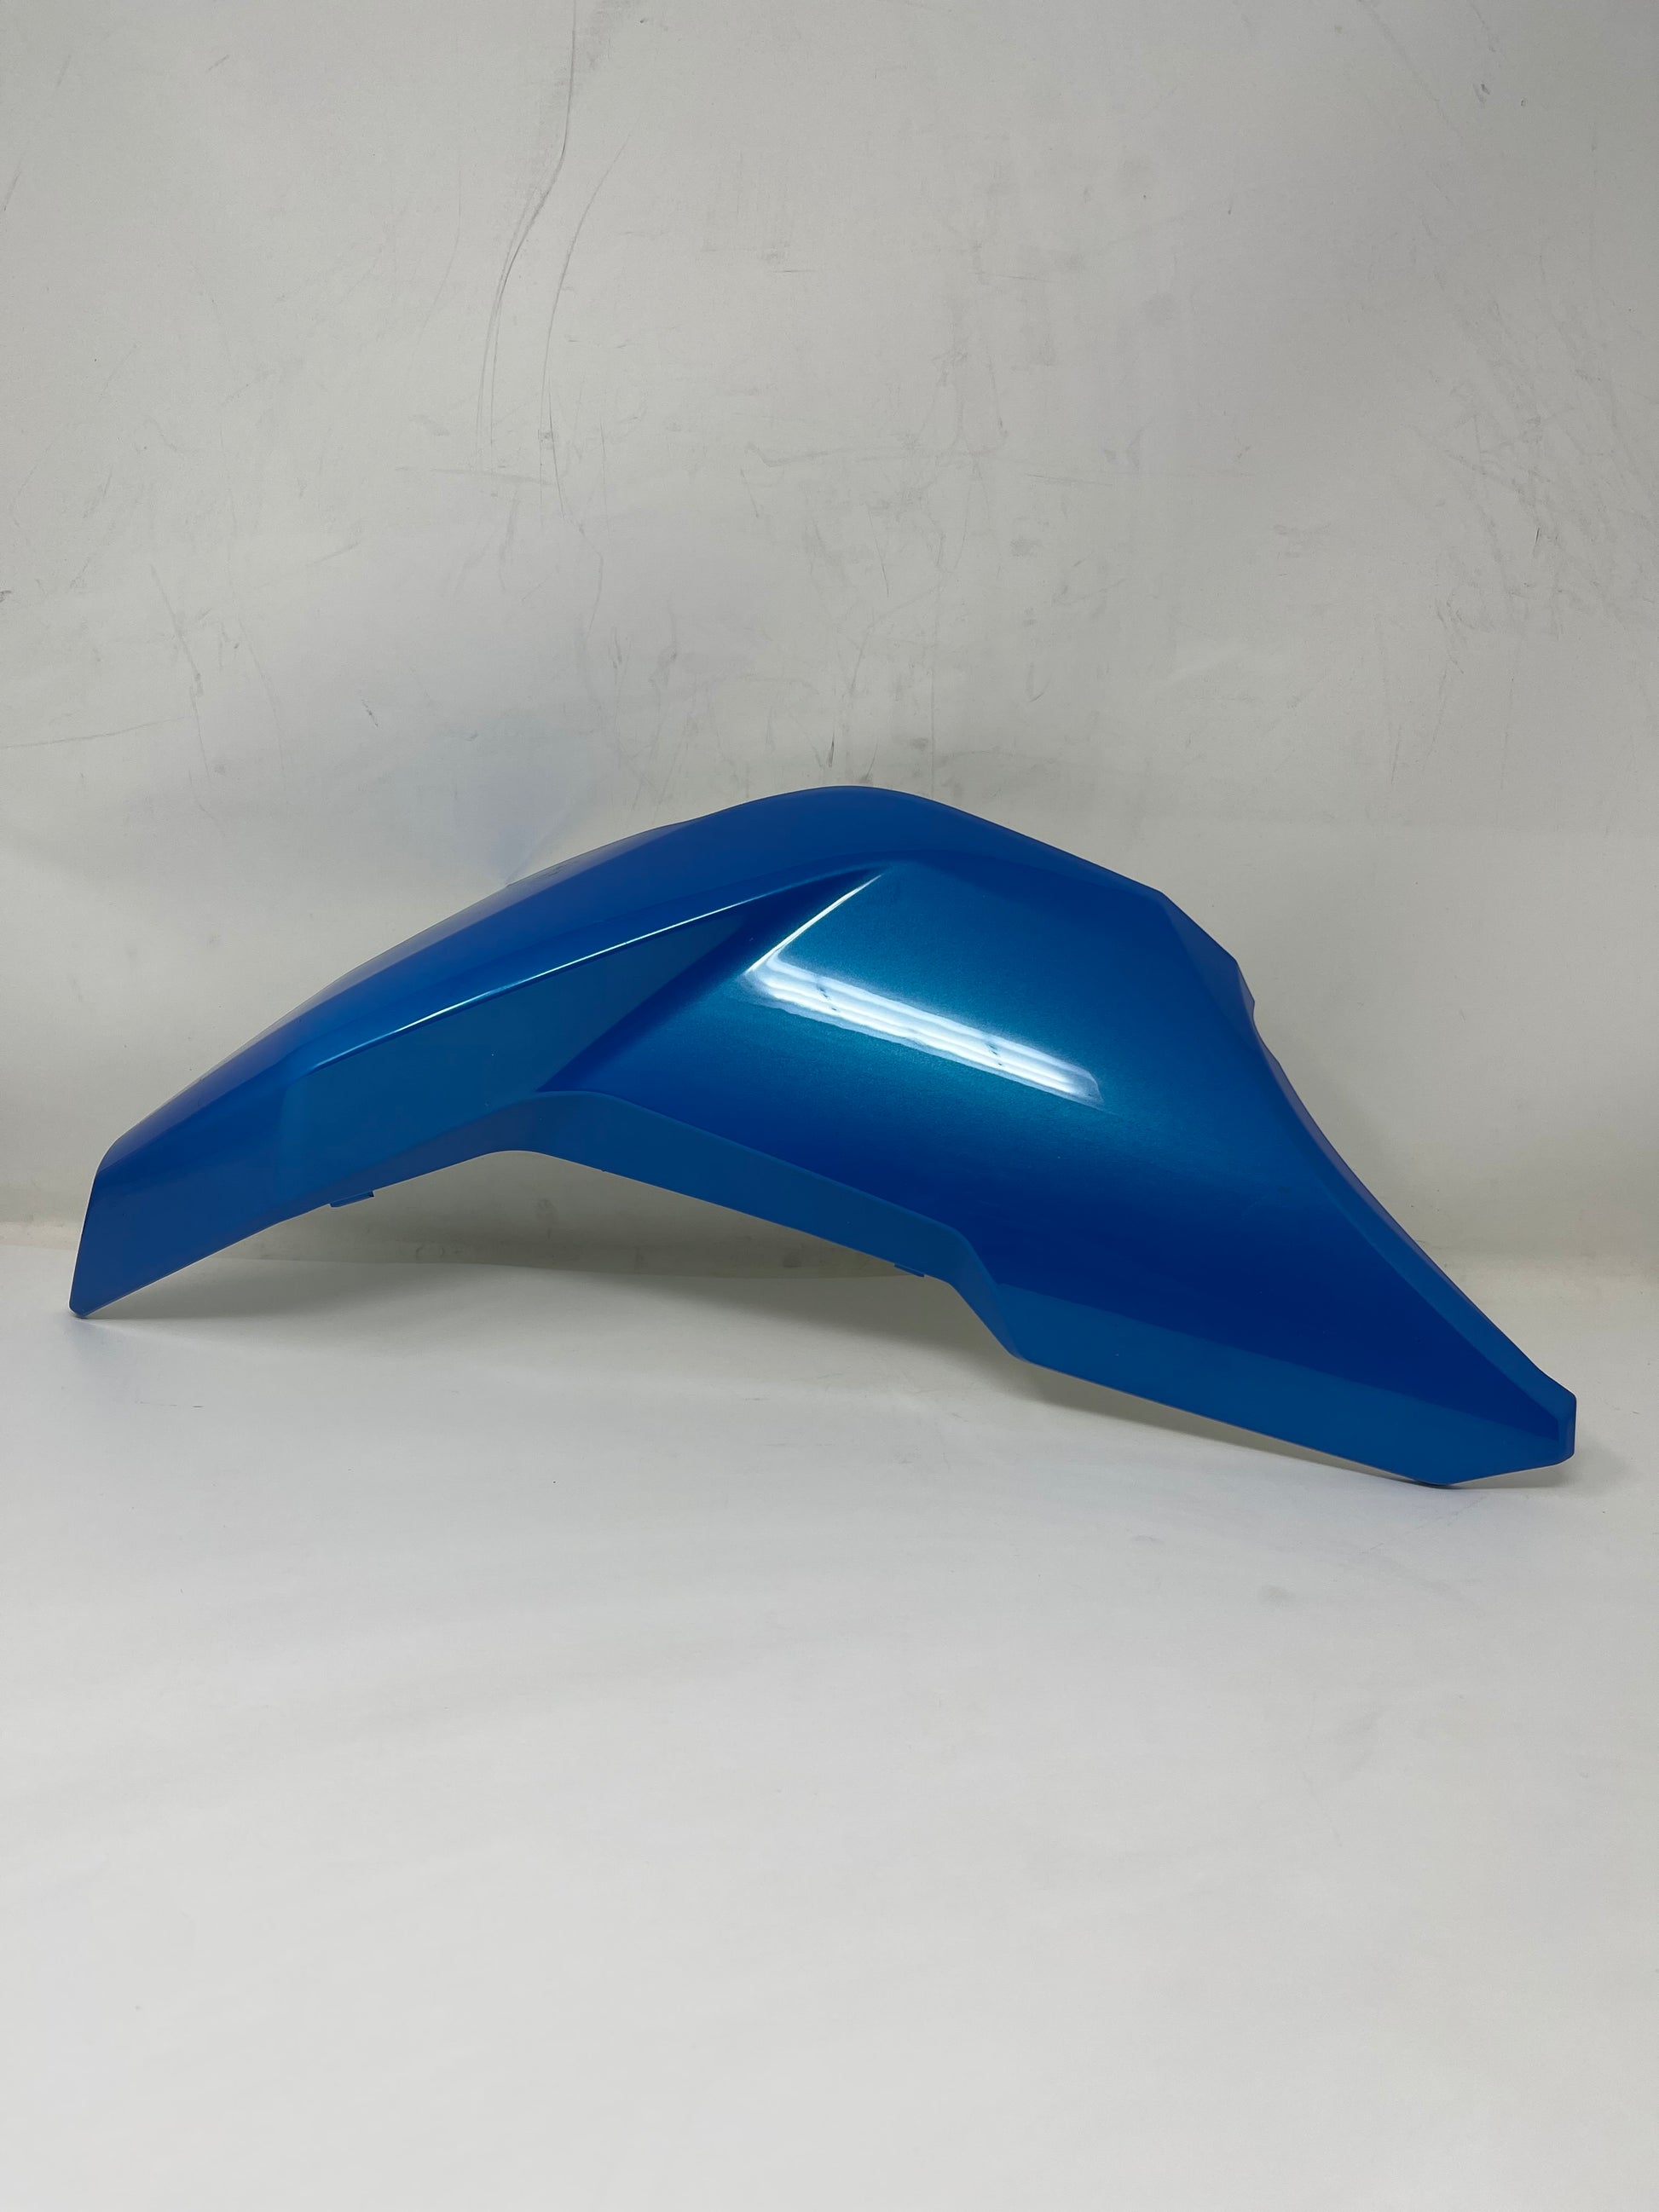 Left fuel tank cover for BD125-10 in blue. Part #125010009